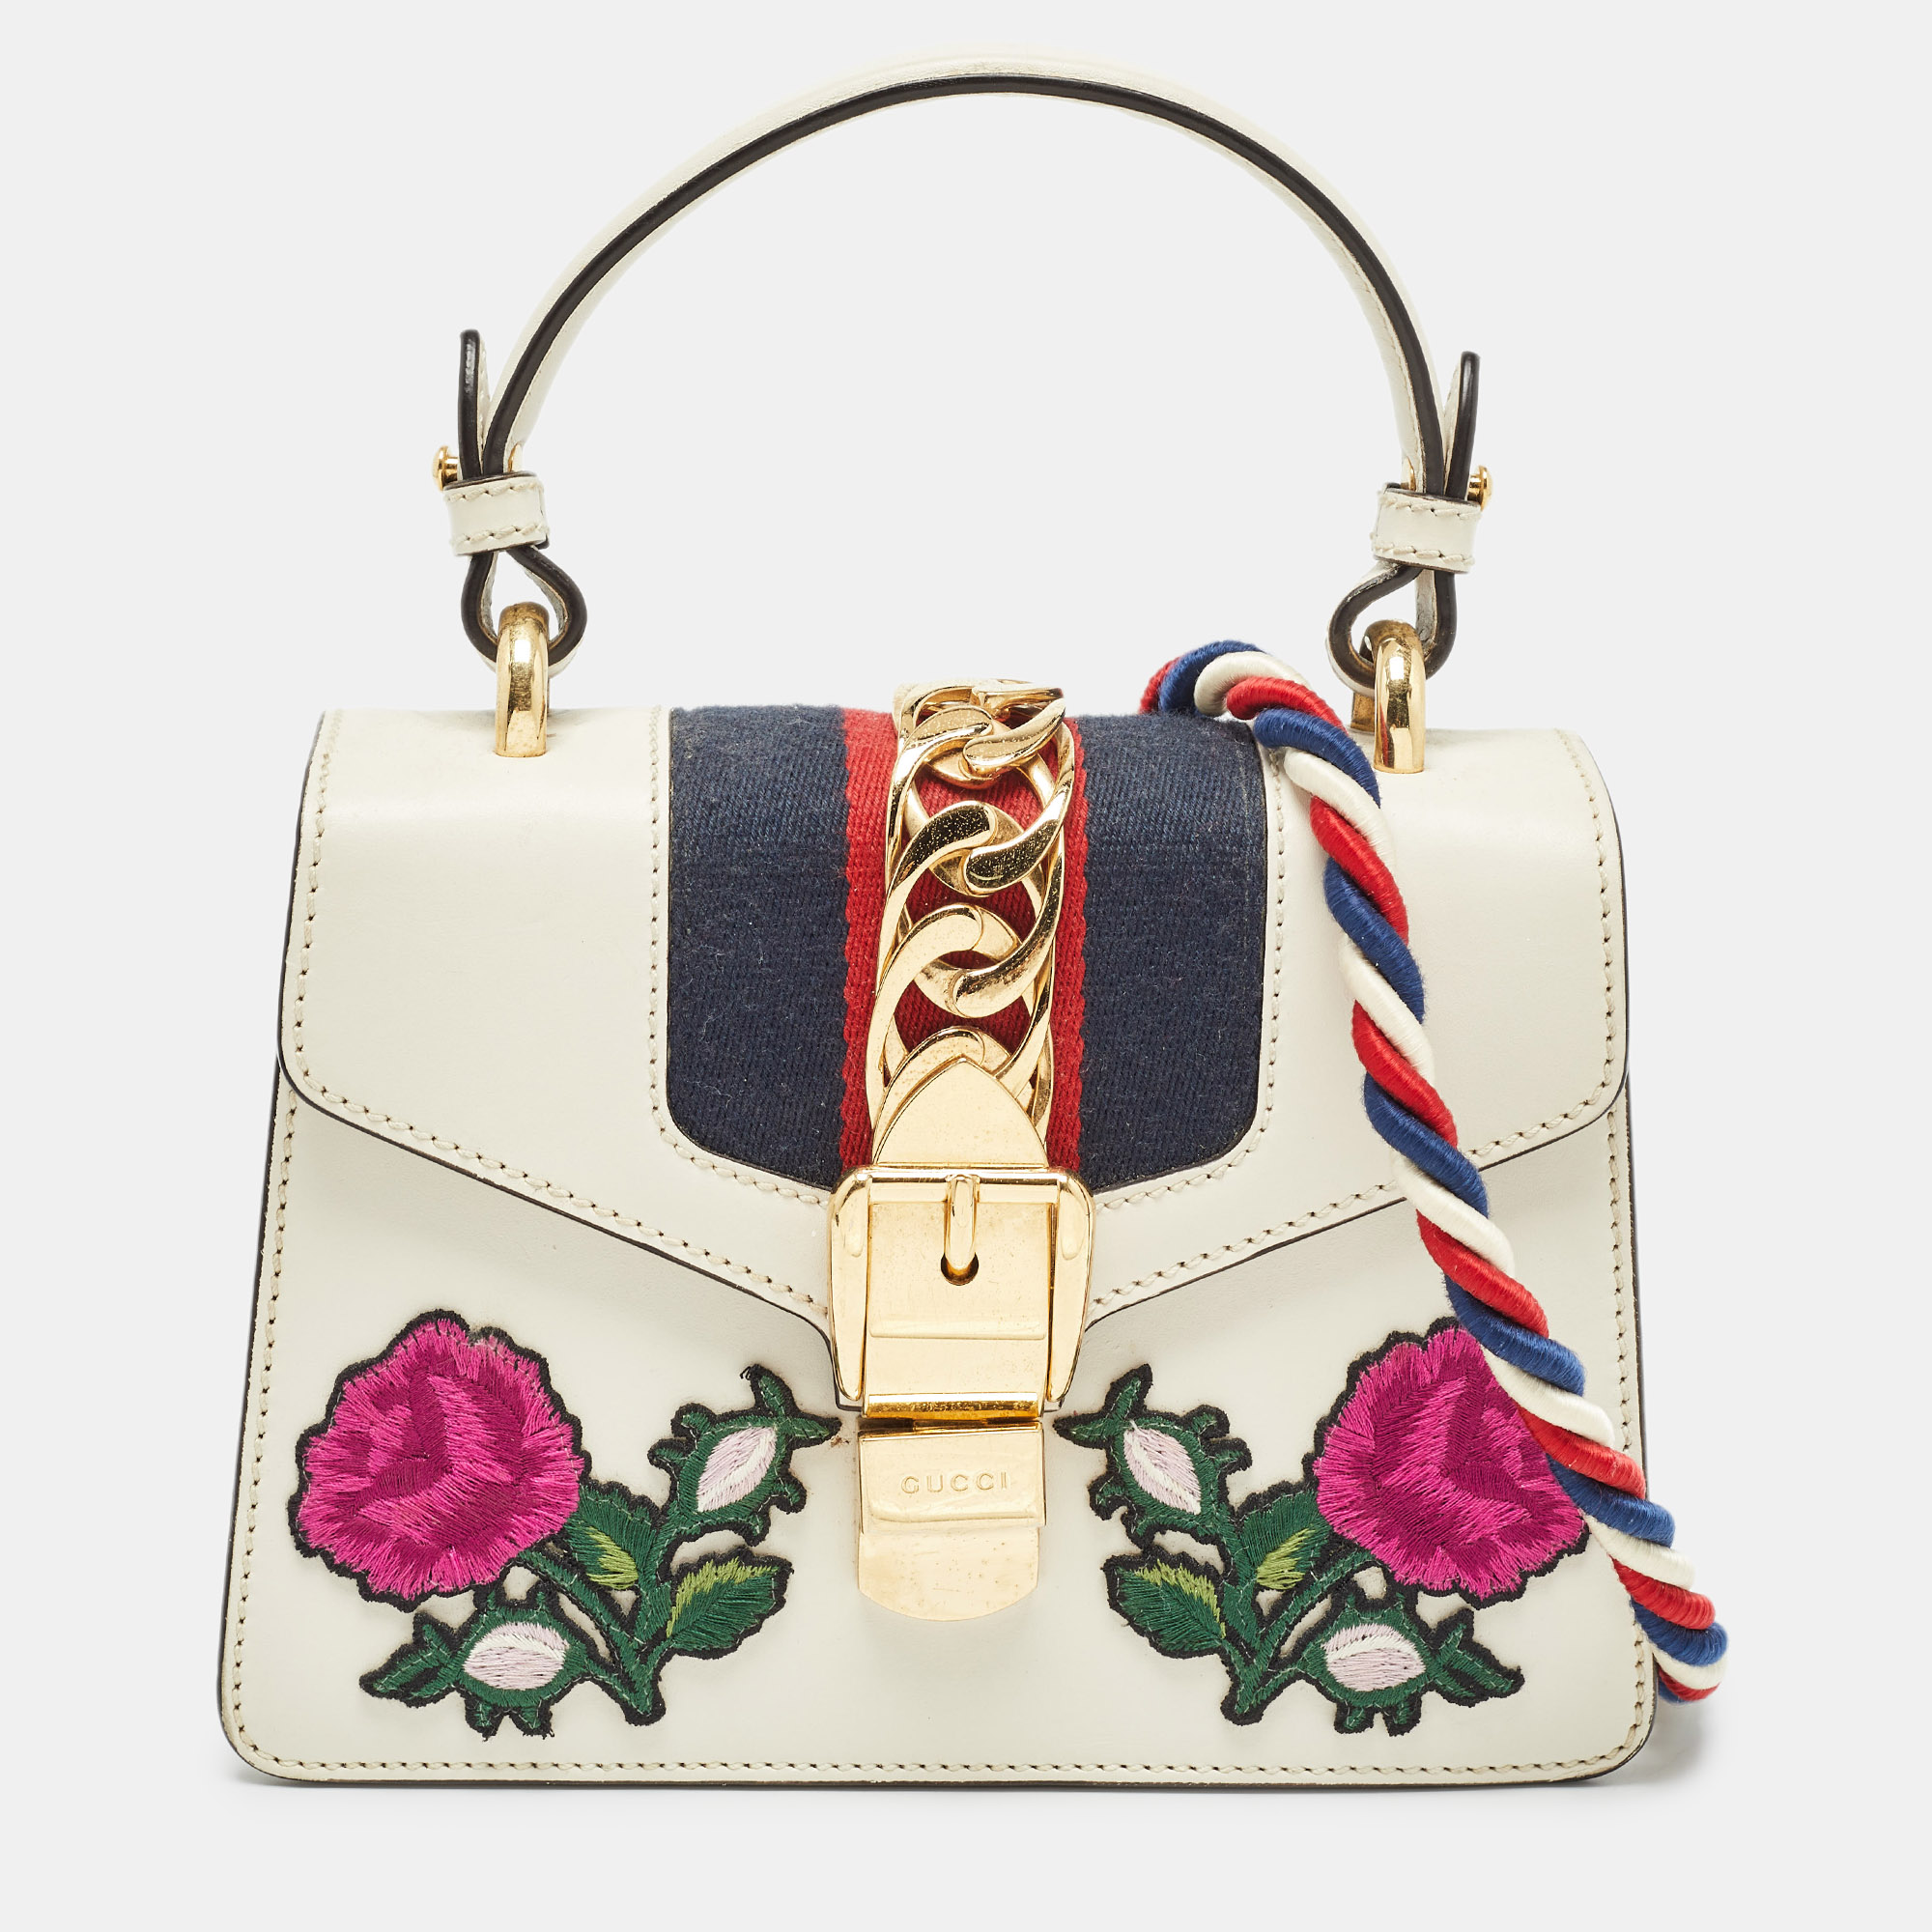 Gucci off white leather mini floral patch sylvie top handle bag